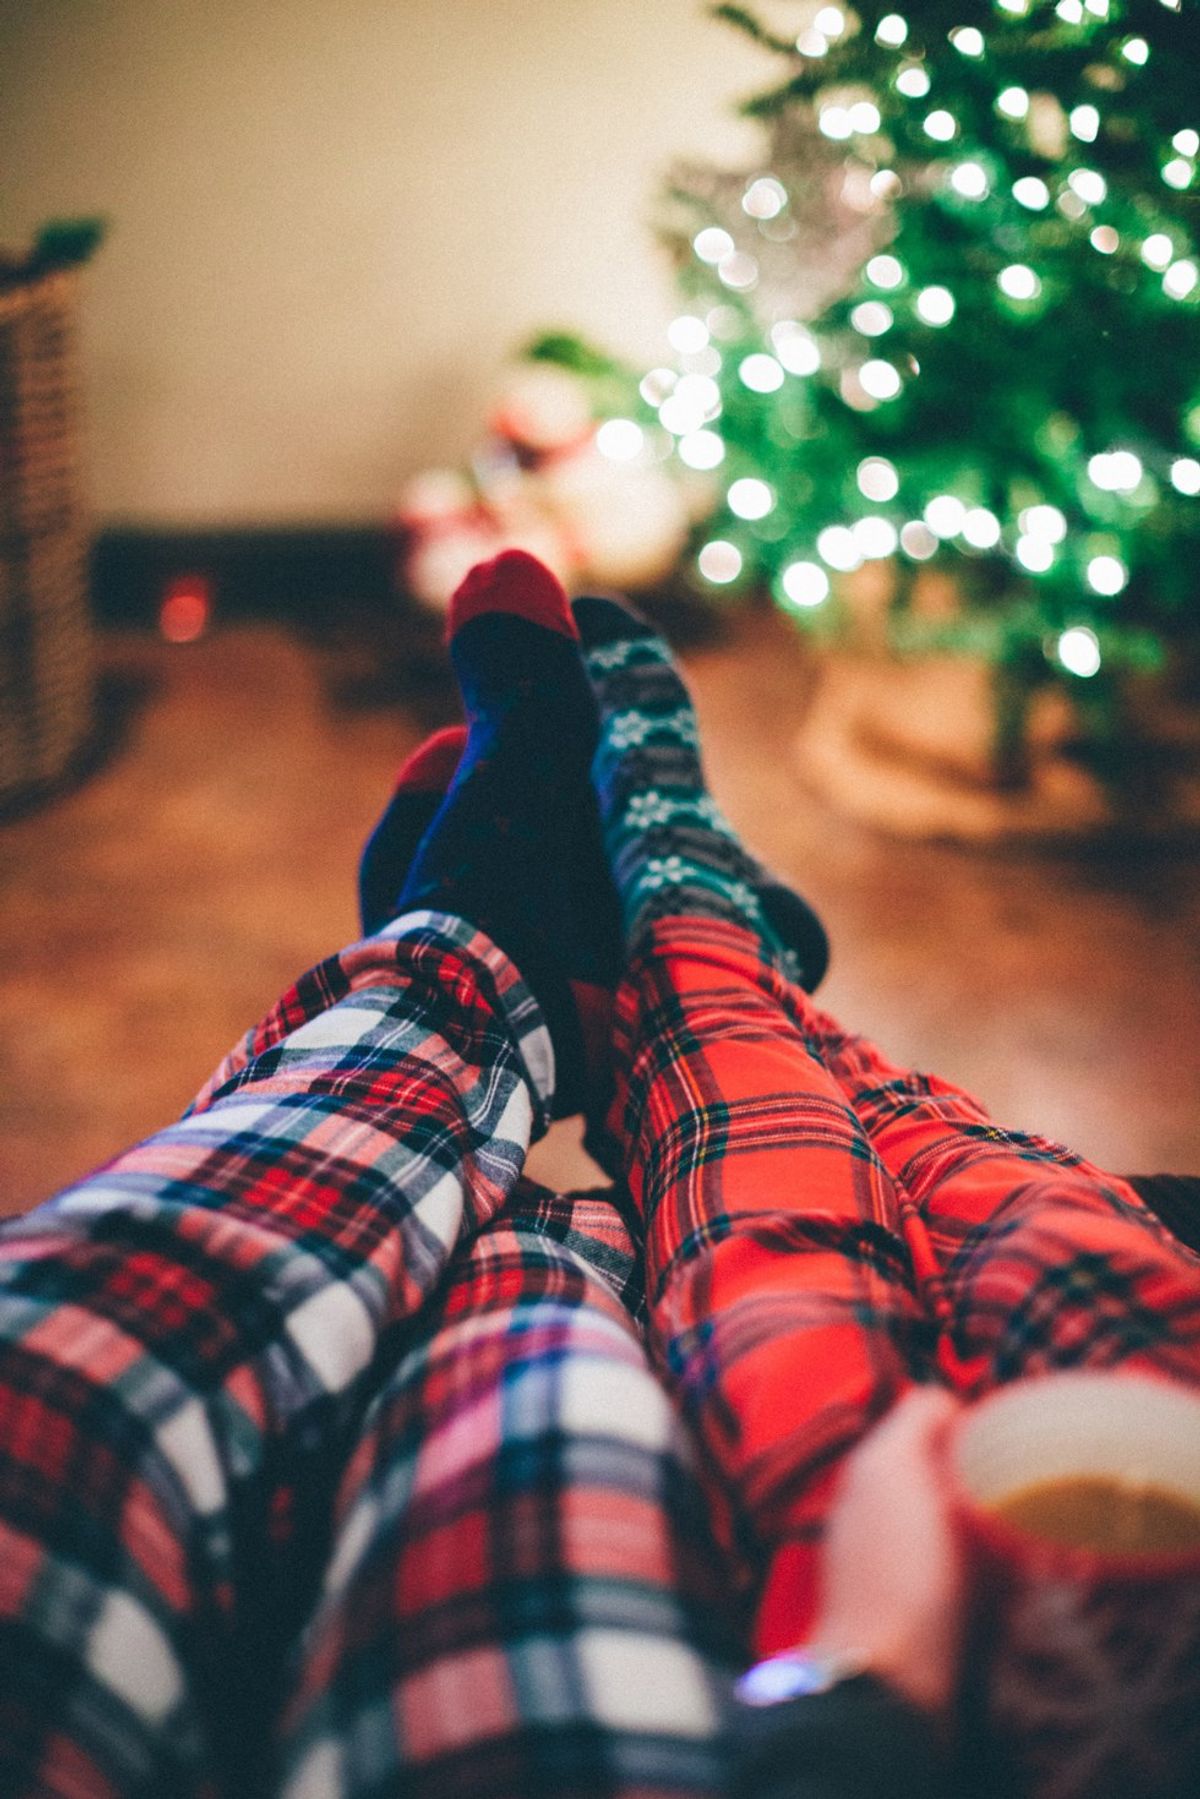 5 Thoughts An Anxious Person Has When Bringing Someone Home for the Holidays